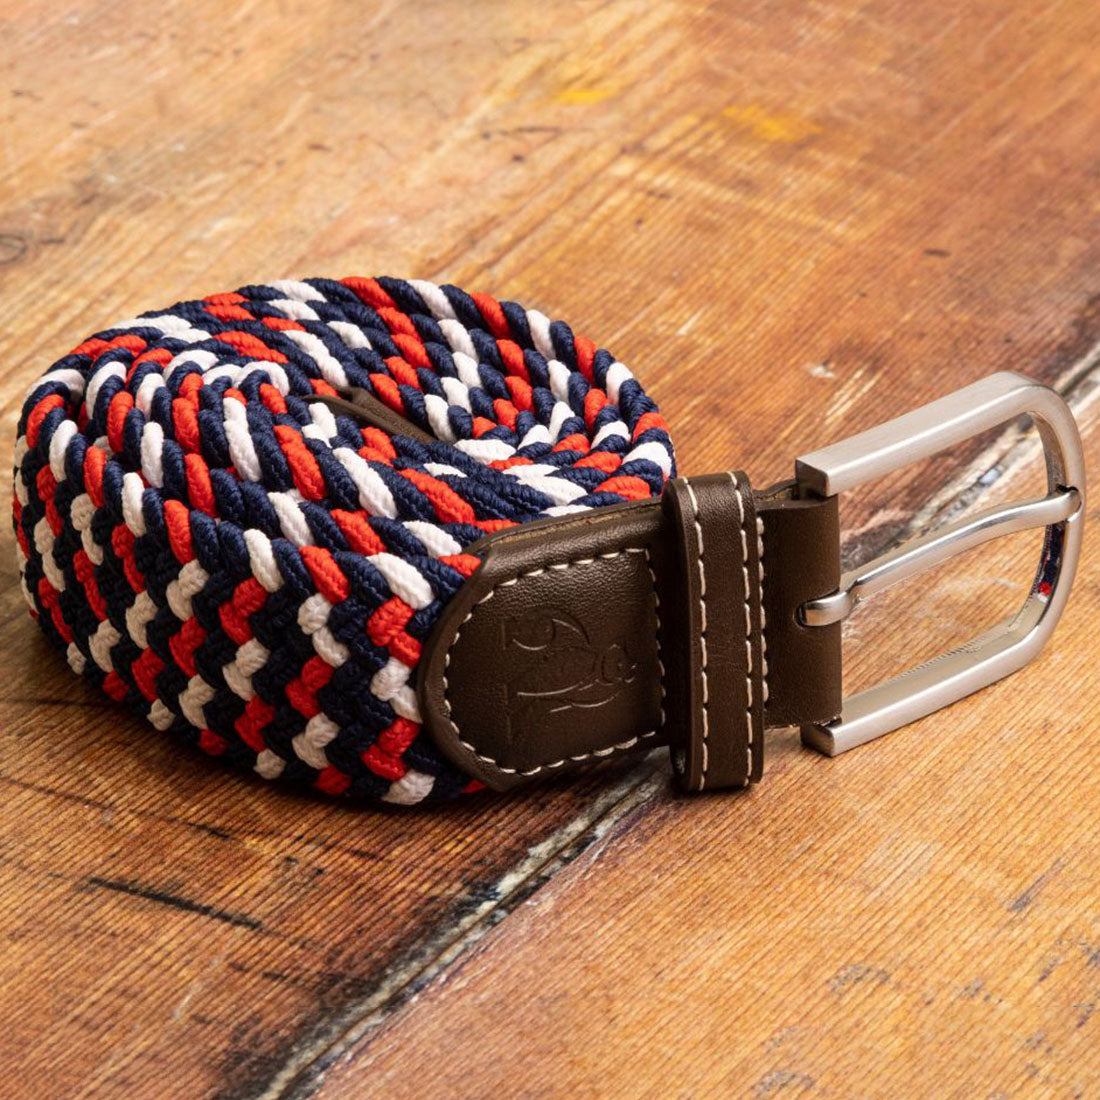 Woven Belt - Blue / Red / White Zigzag